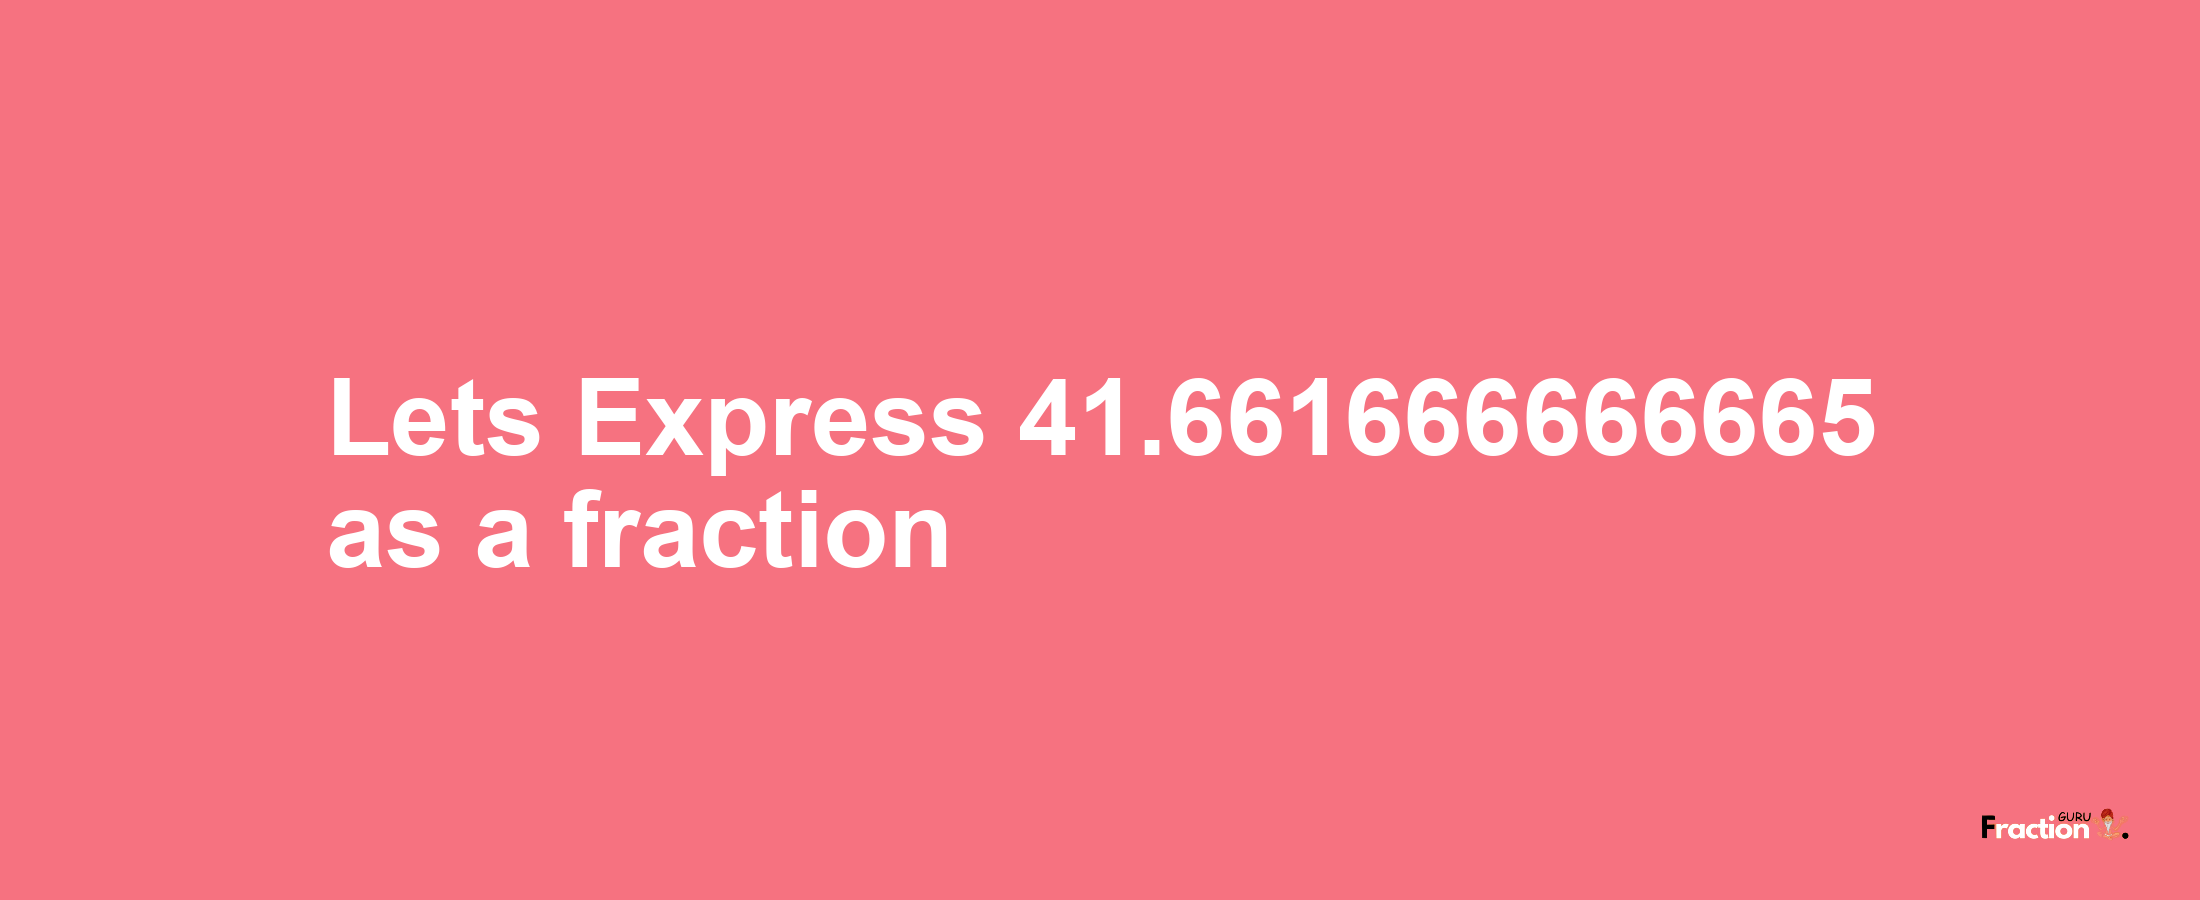 Lets Express 41.661666666665 as afraction